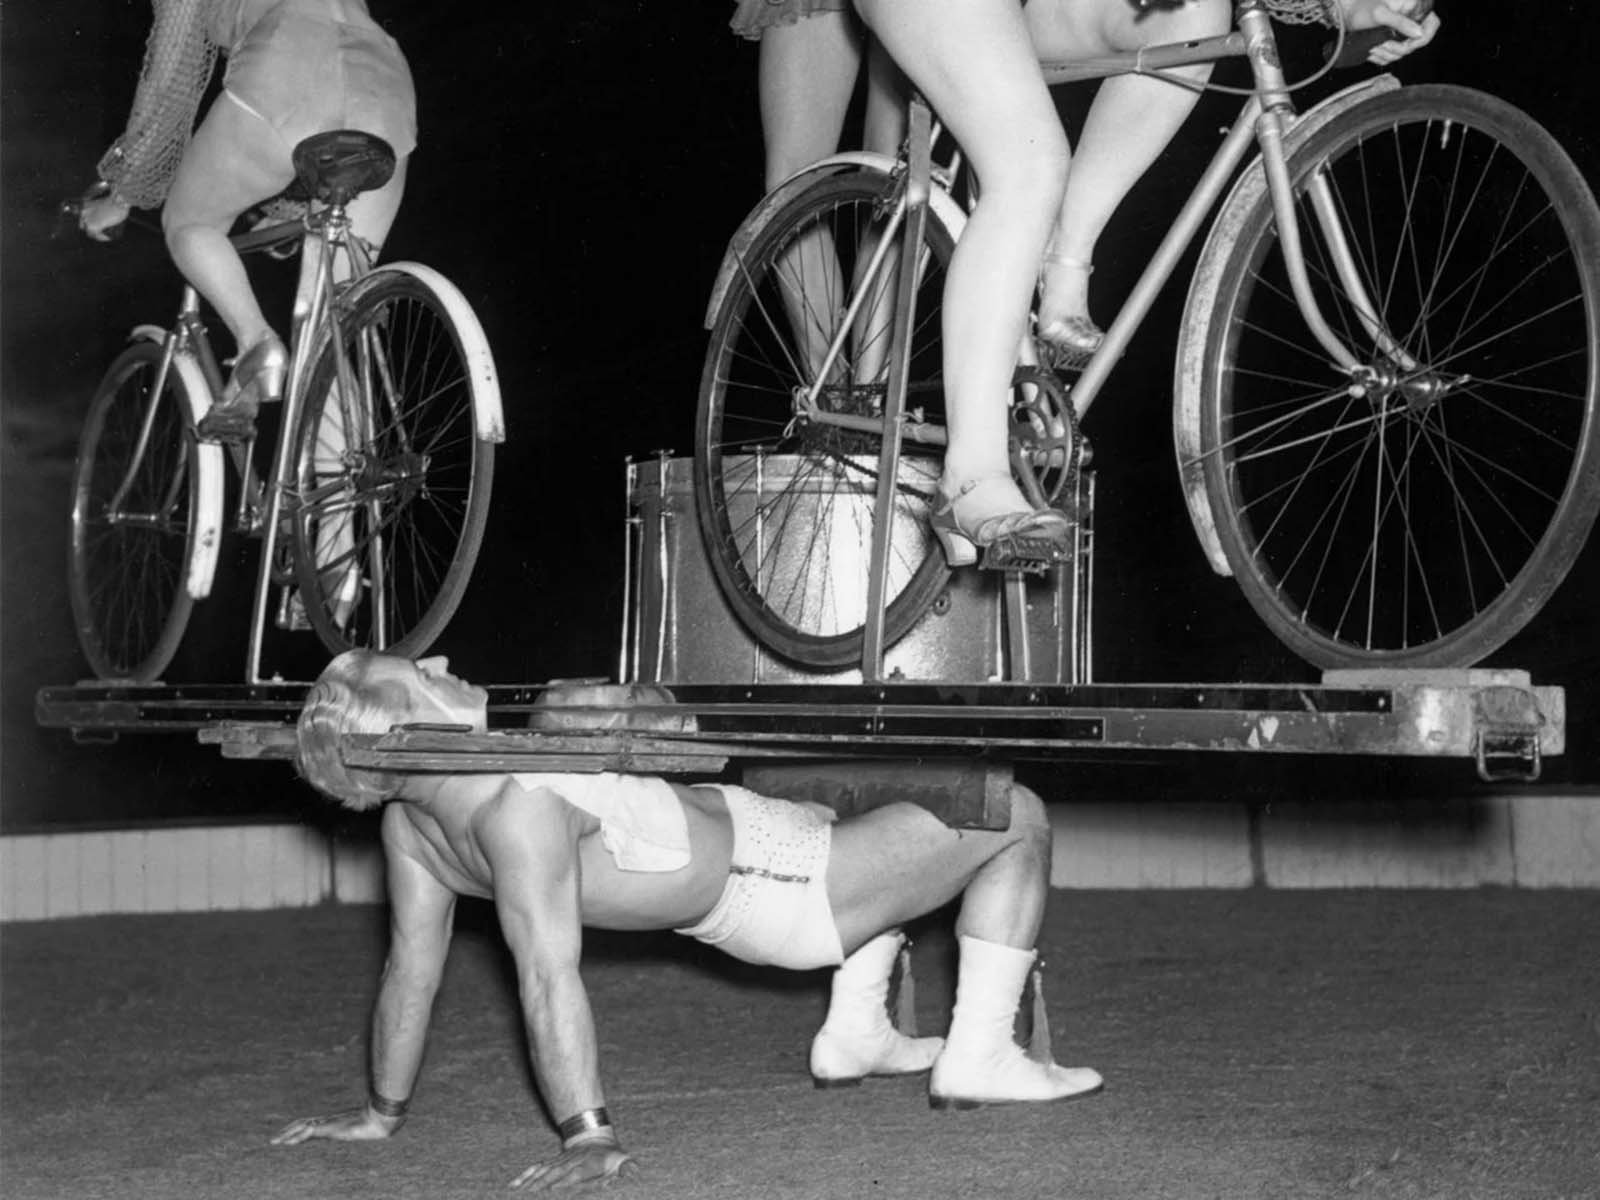 Strongman Mr. Briton balances tow cyclists and a dancer on his chest in Harry Benet’s circus at Chiswick Empire in London, England on Sept. 4, 1945